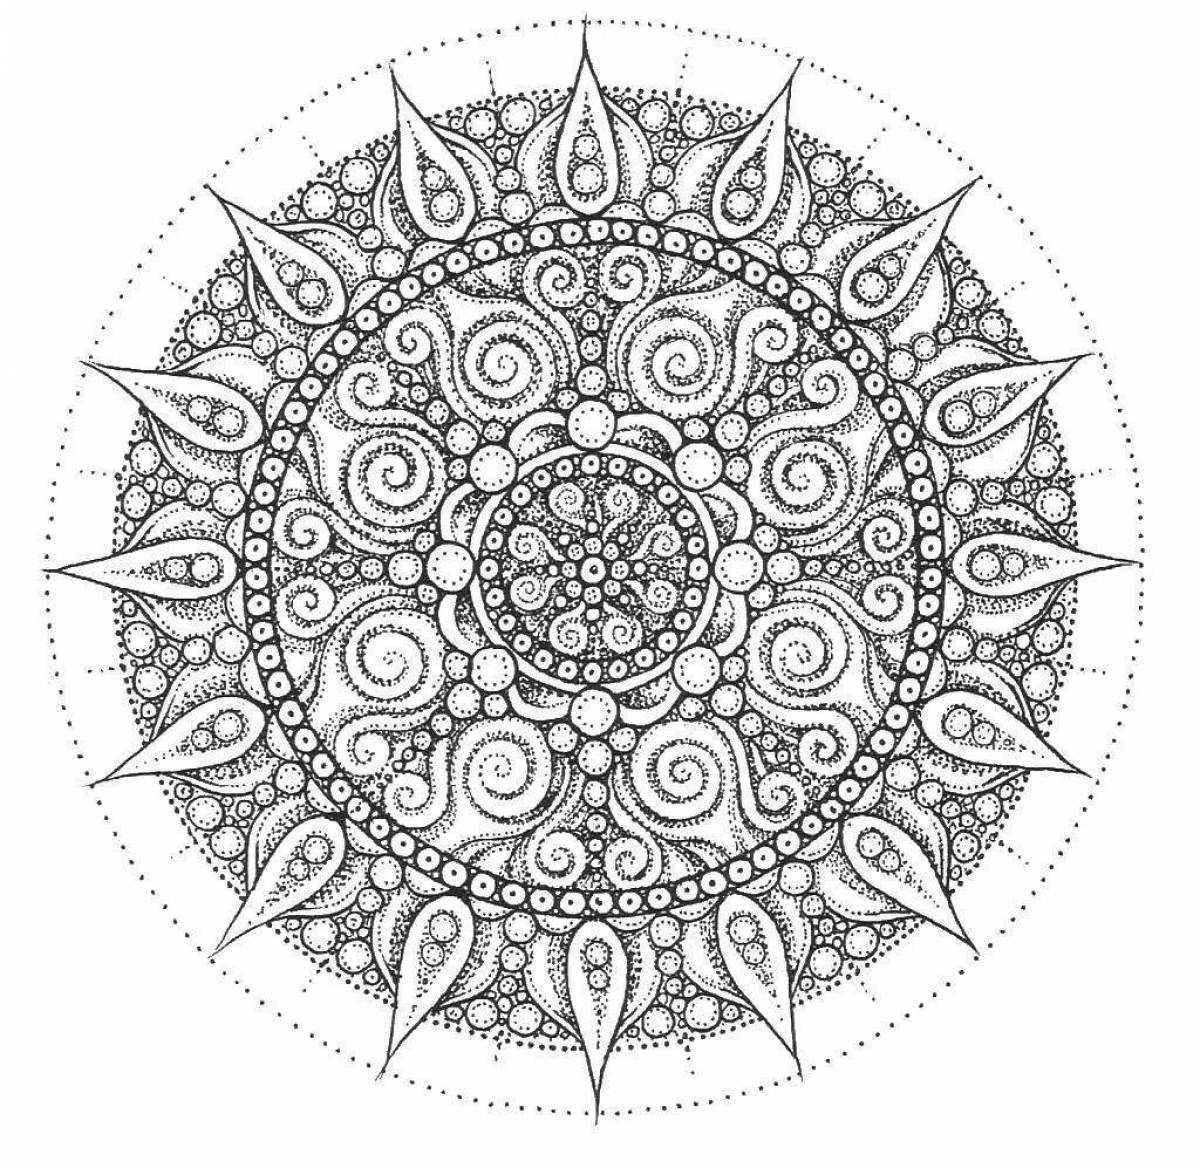 Sublime coloring page circle of life готовая работа